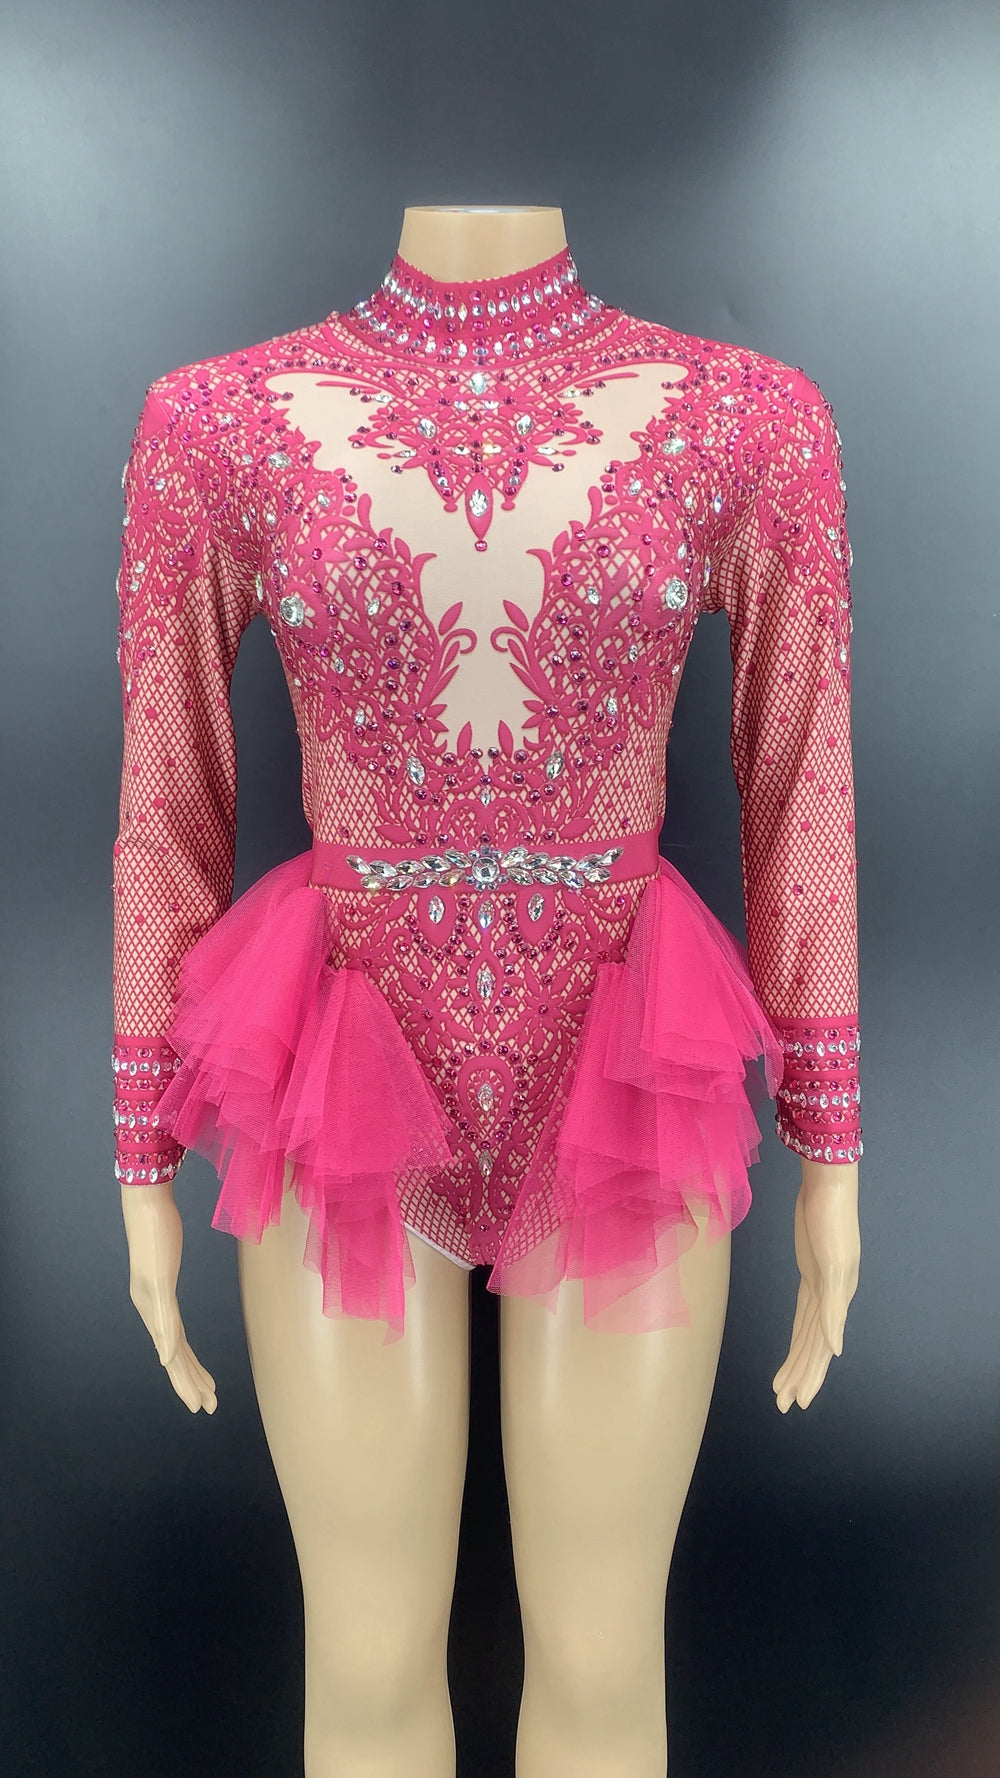 Sparkly Rhinestones Lace Bodysuit Women Long Sleeve Club Outfit Dance Costume Sexy Show Performance Stage Wear Birthday Dress